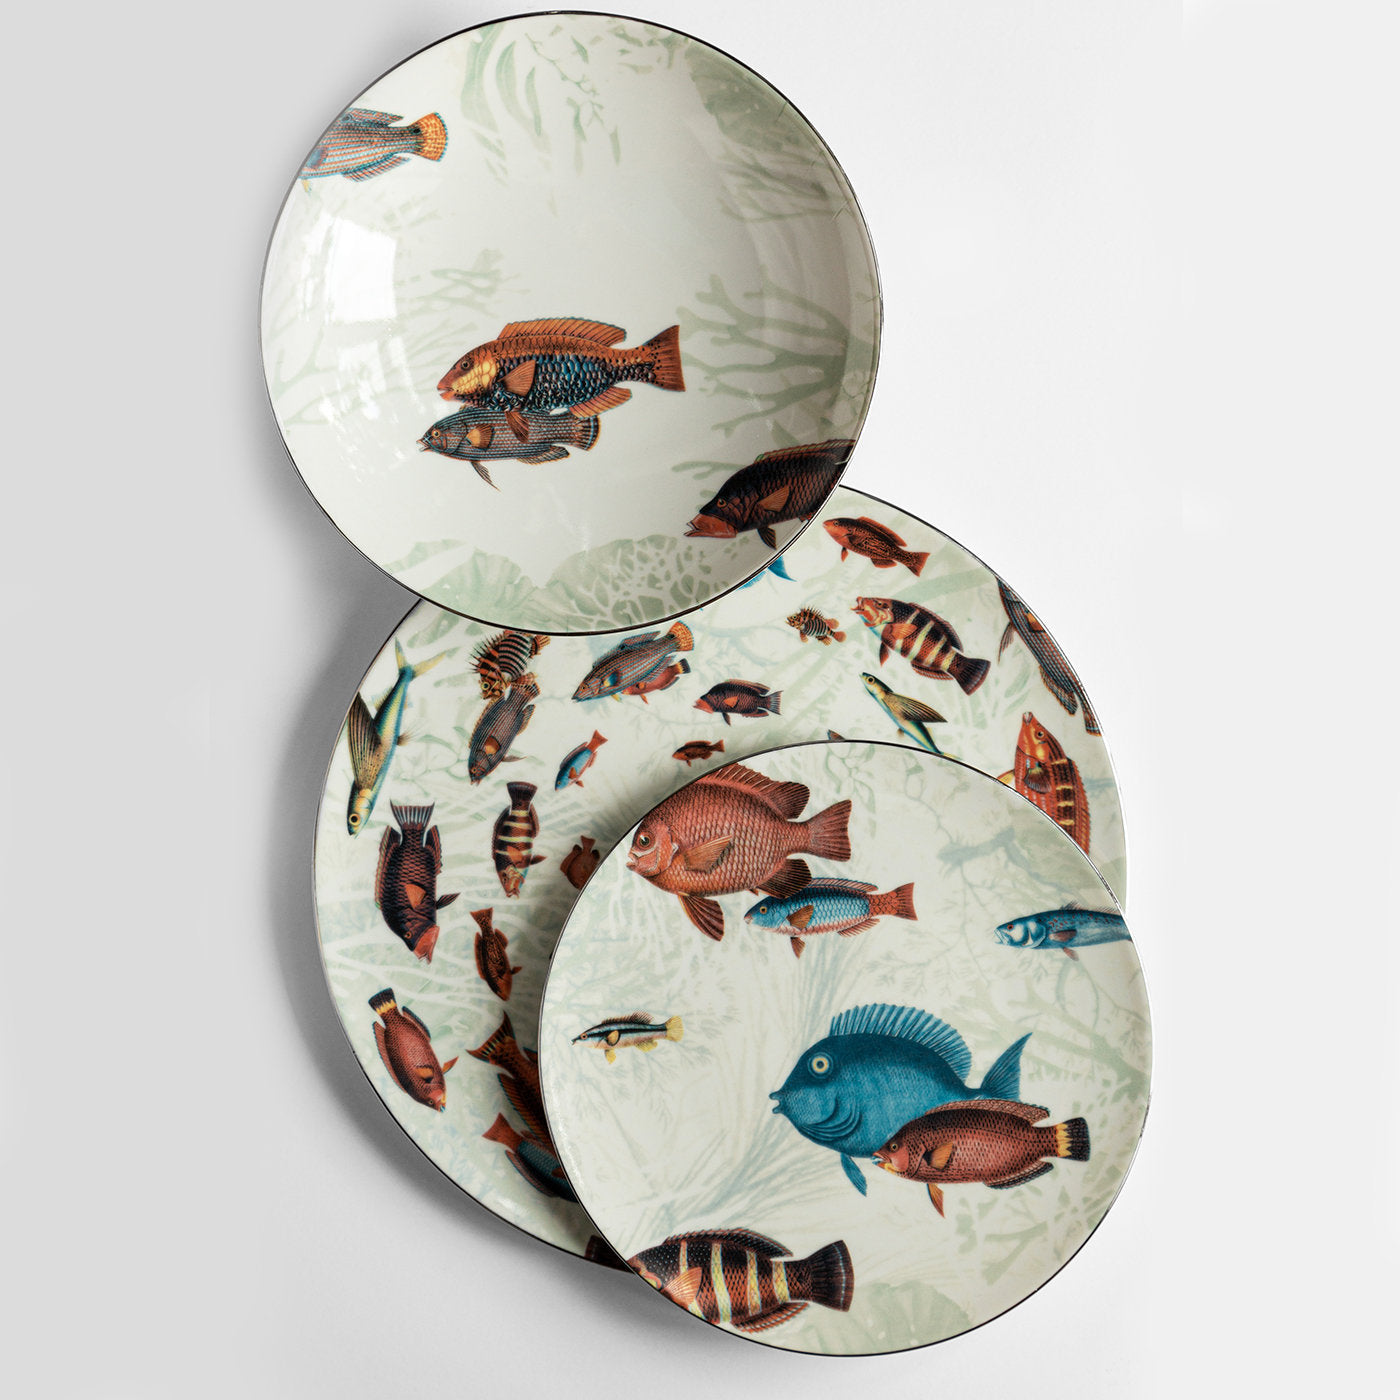 Amami Set Of 2 Porcelain Dessert Plates With Tropical Fish #1 - Alternative view 2